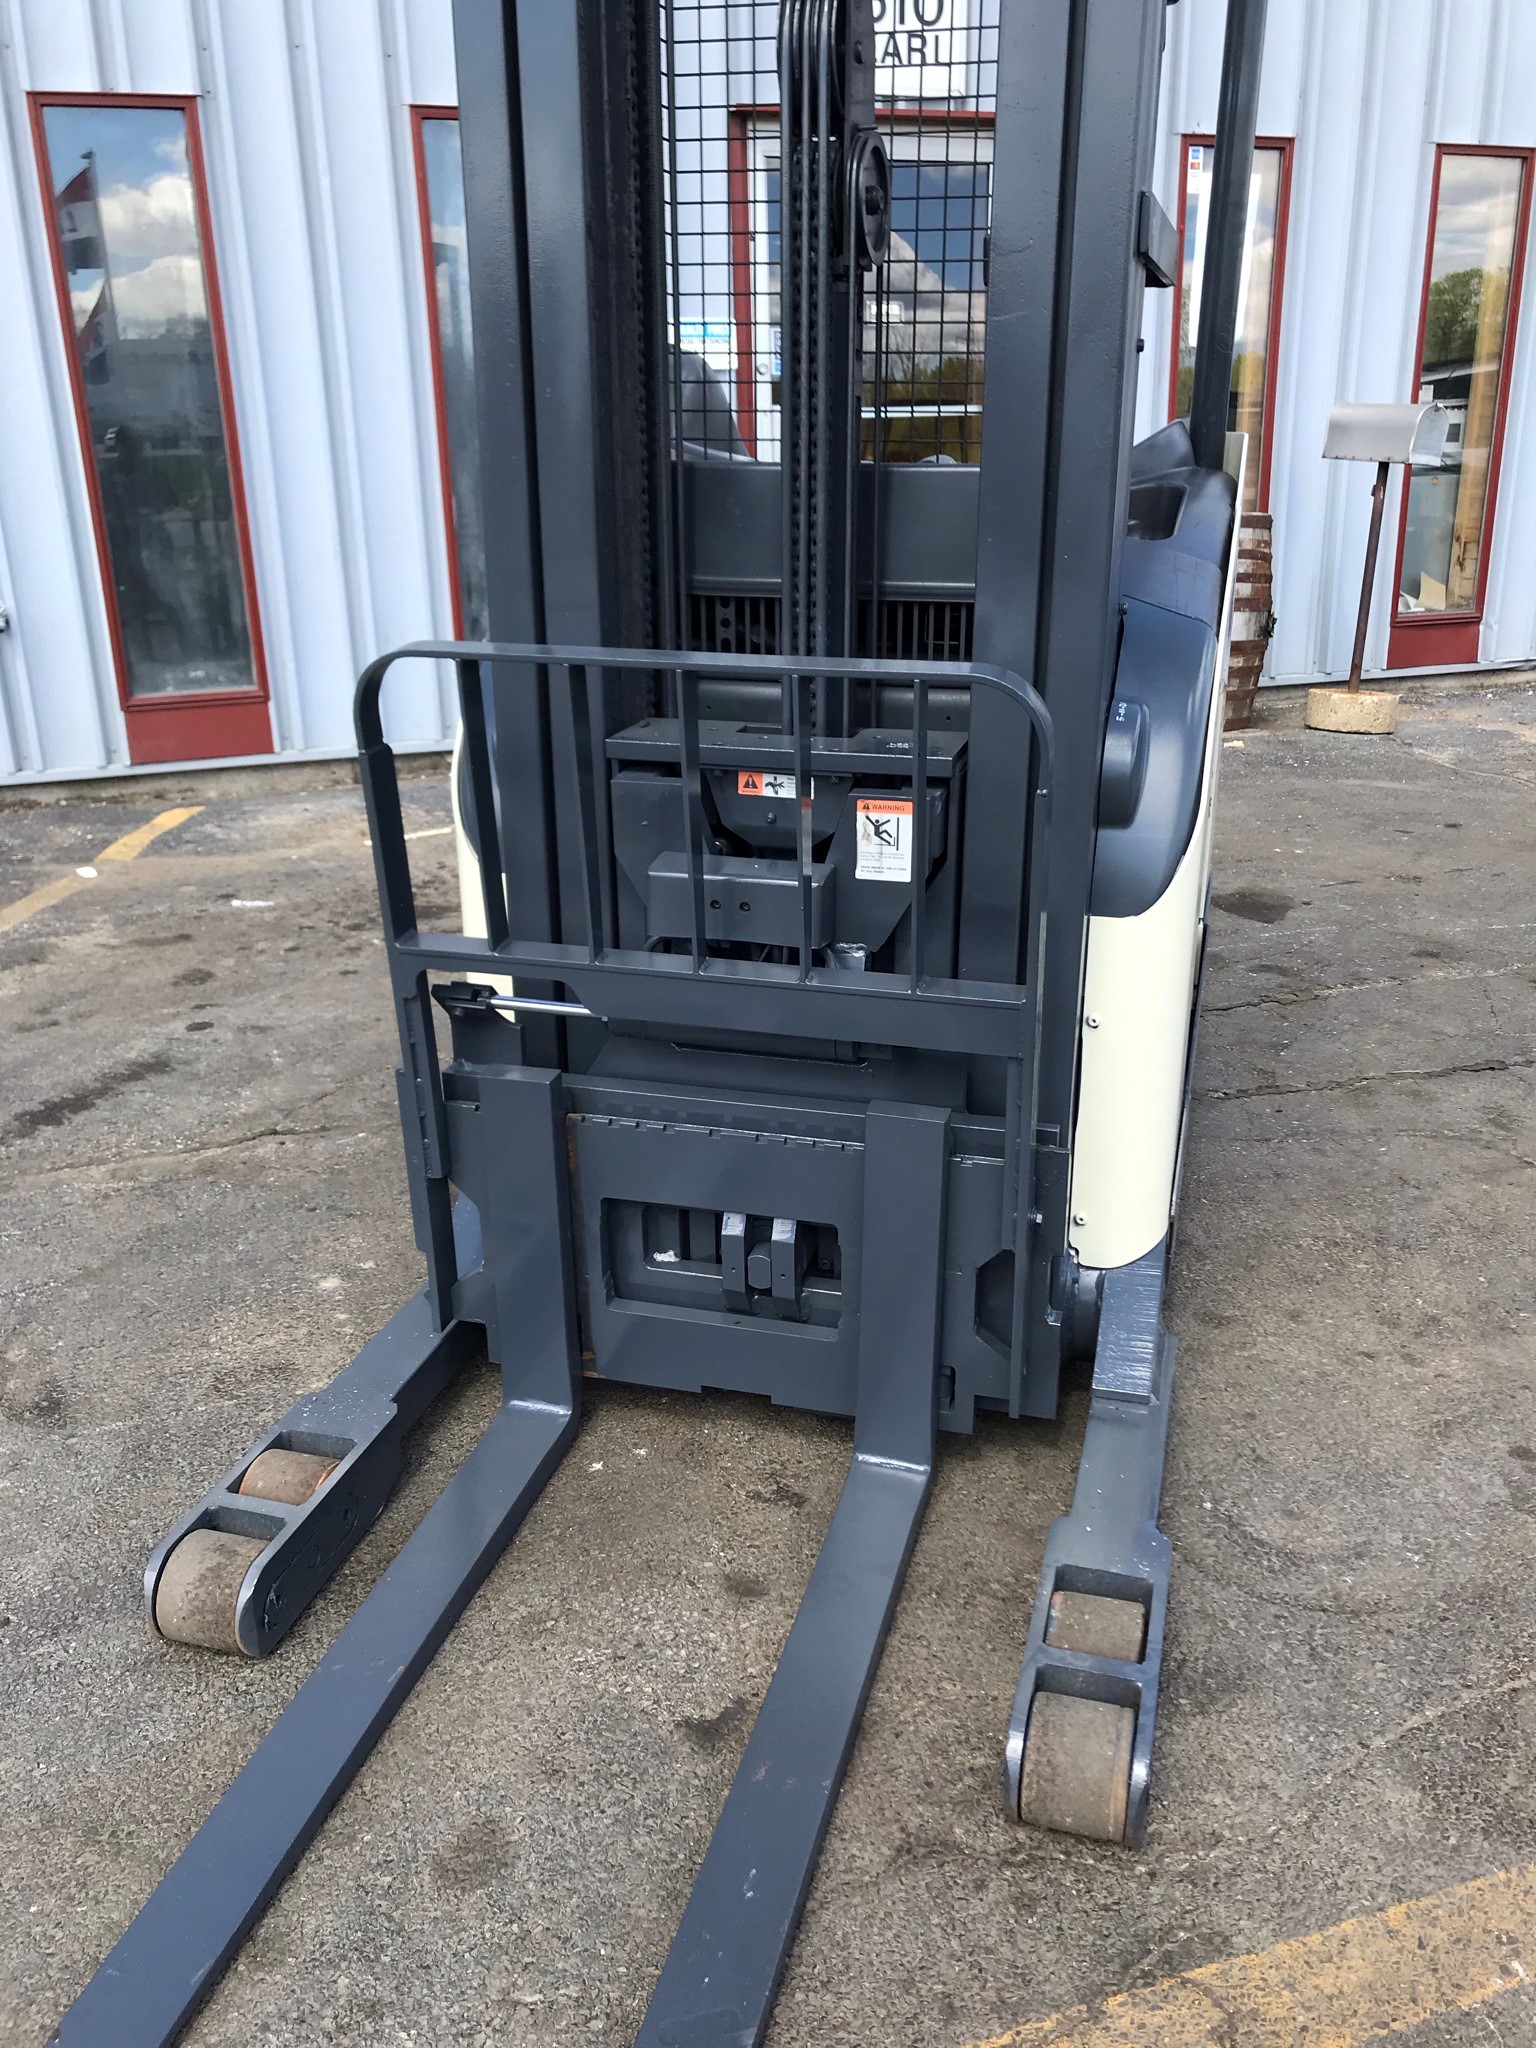 42" forks white crown reach truck for sale